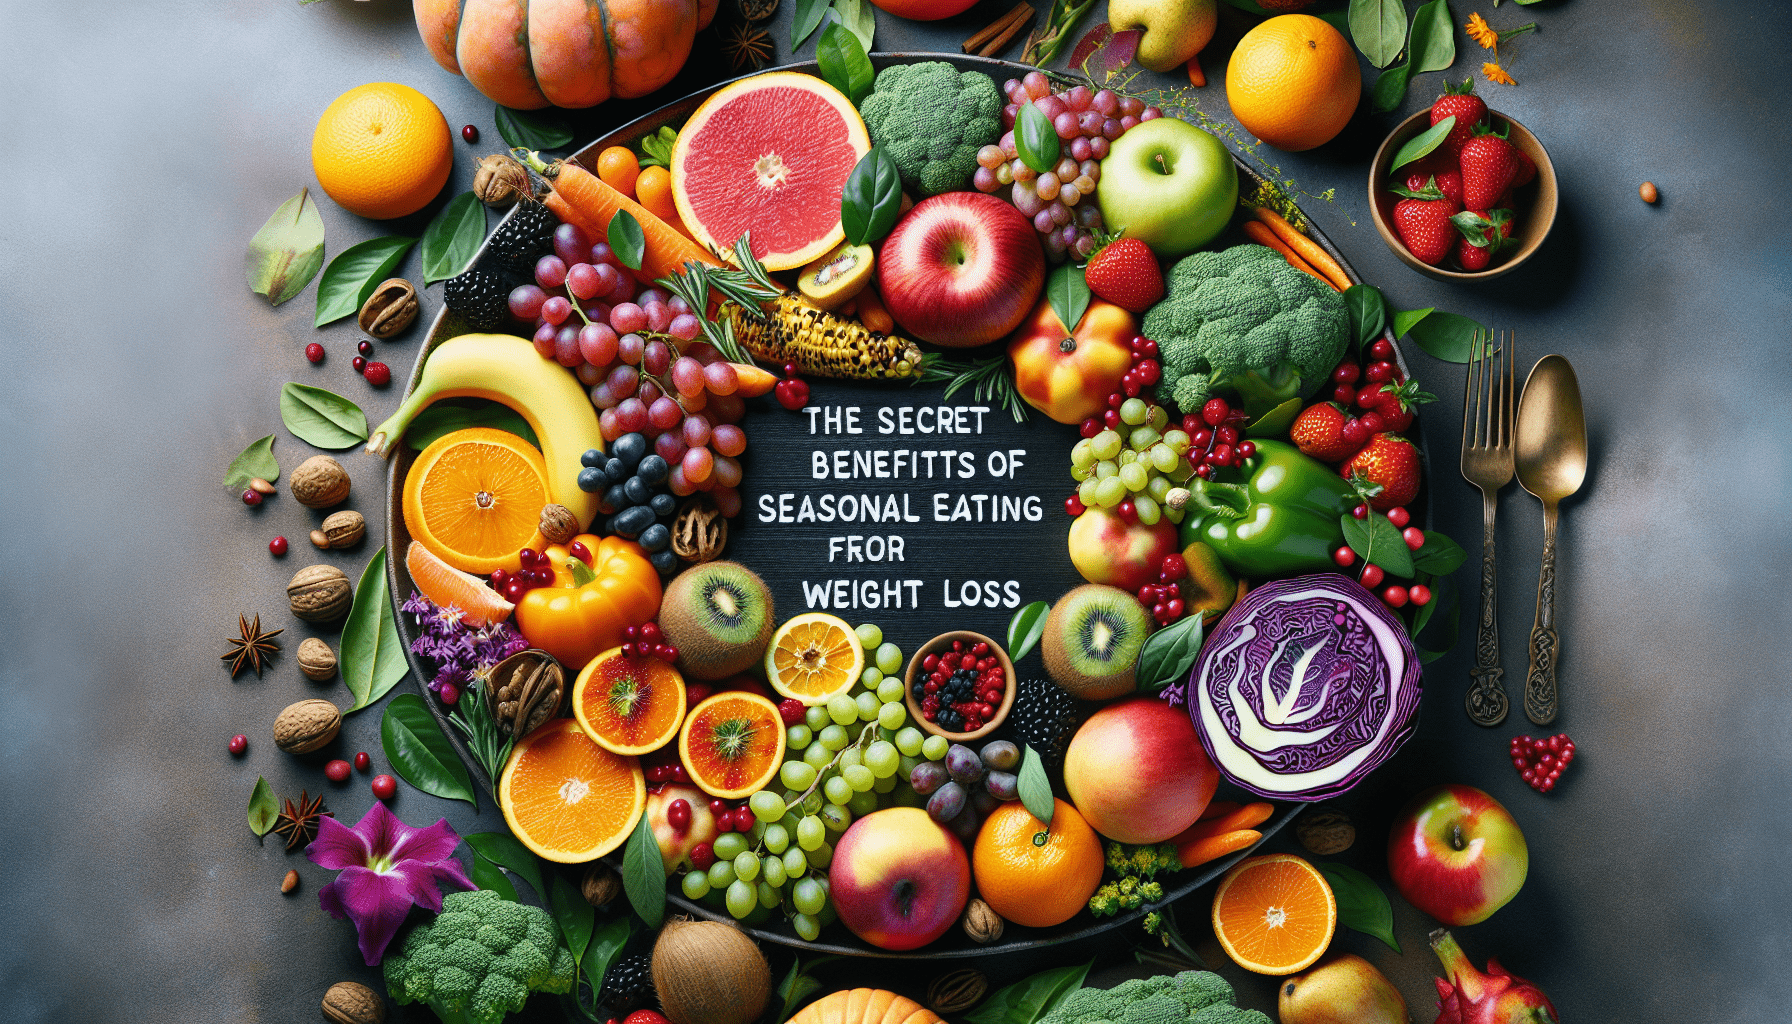 The Secret Benefits Of Seasonal Eating For Weight Loss